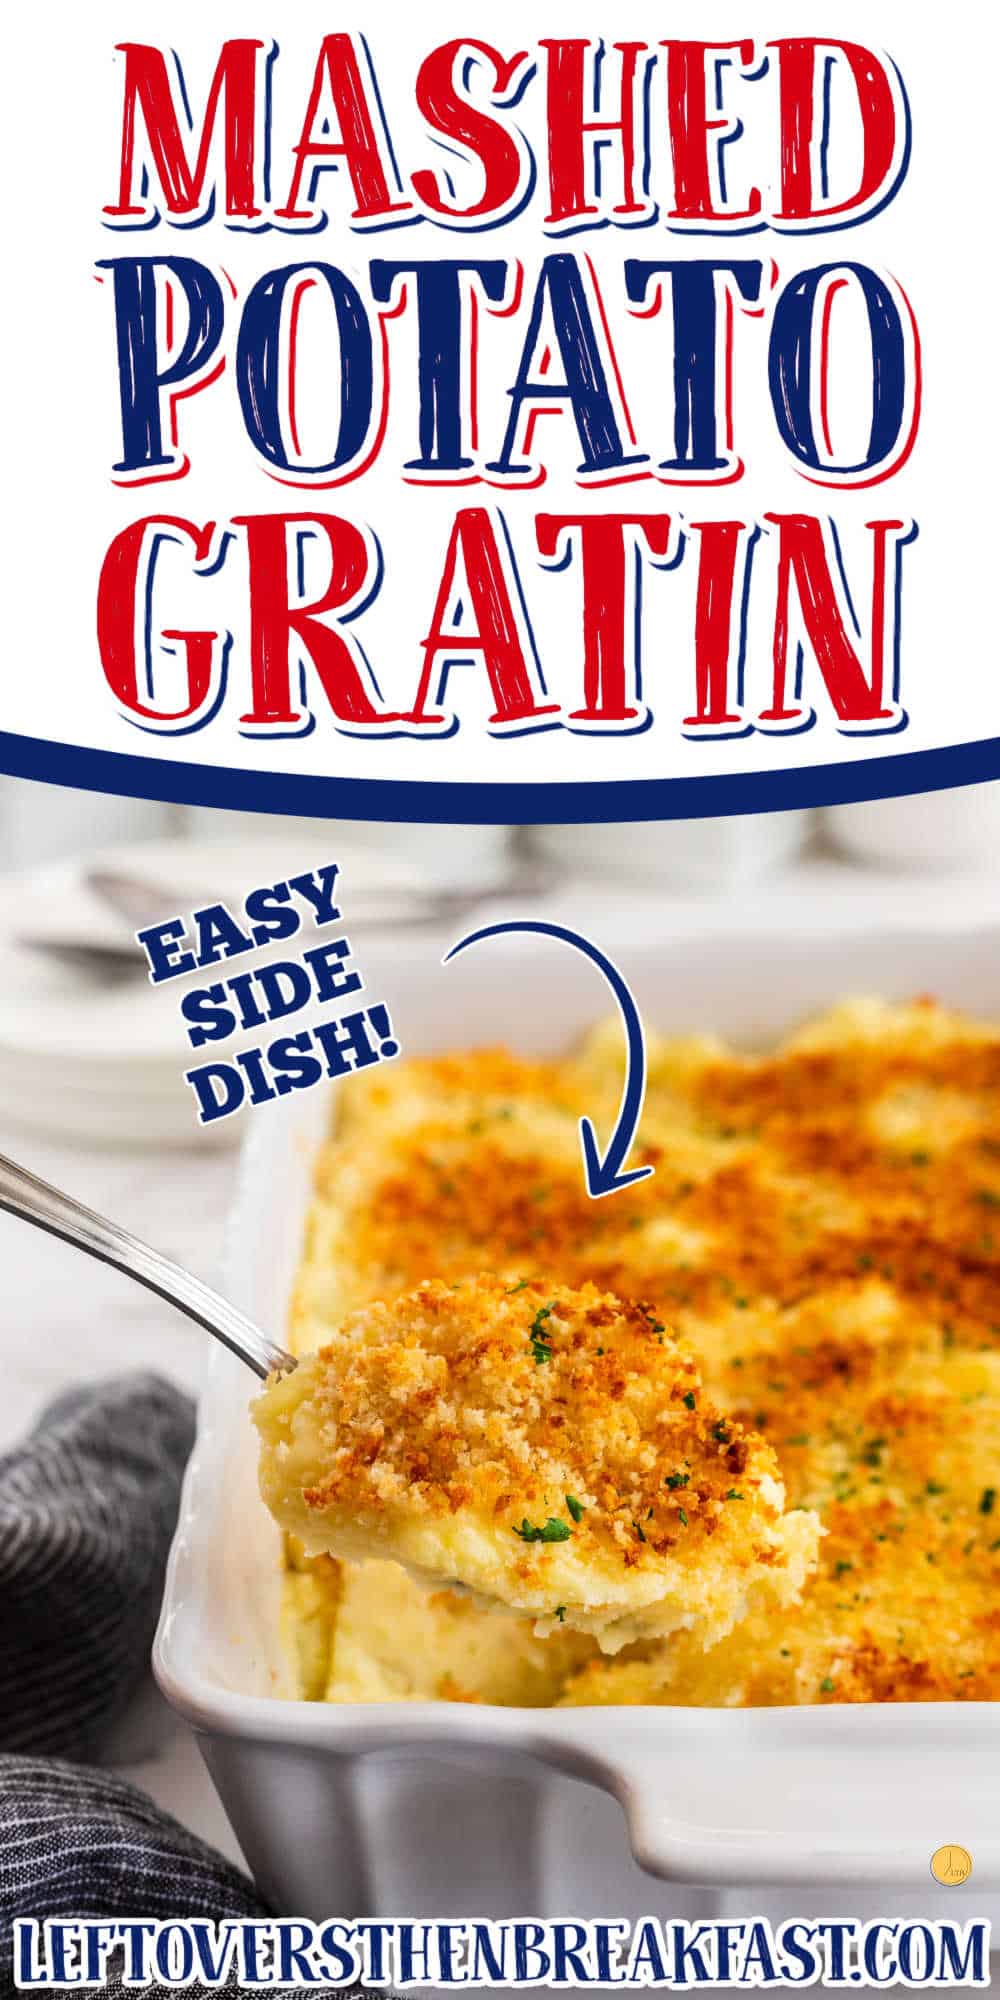 scoop of mashed potatoes with text "mashed potato gratin"